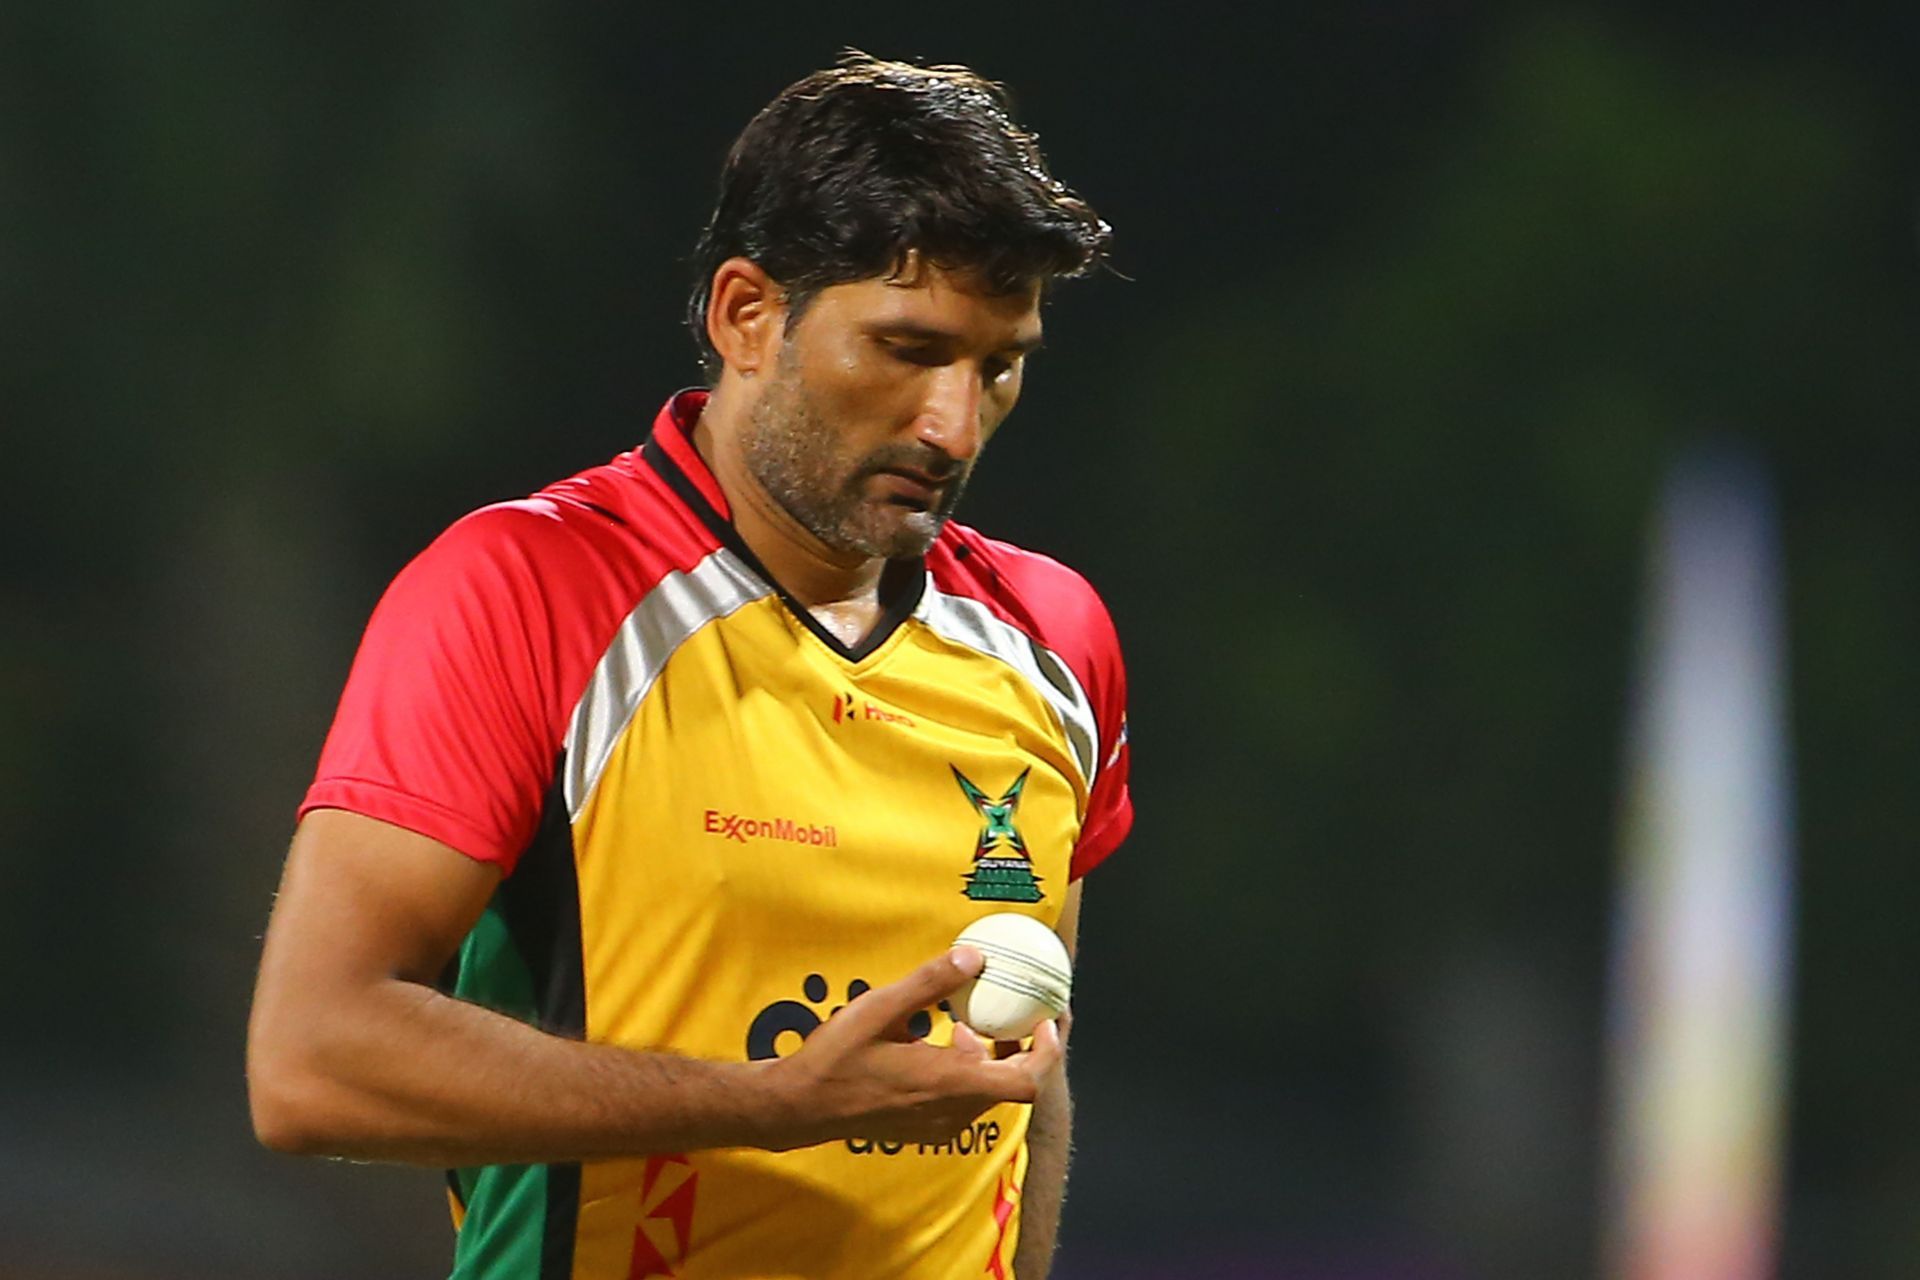 Sohail Tanvir is the leading wicket-taker in the competition